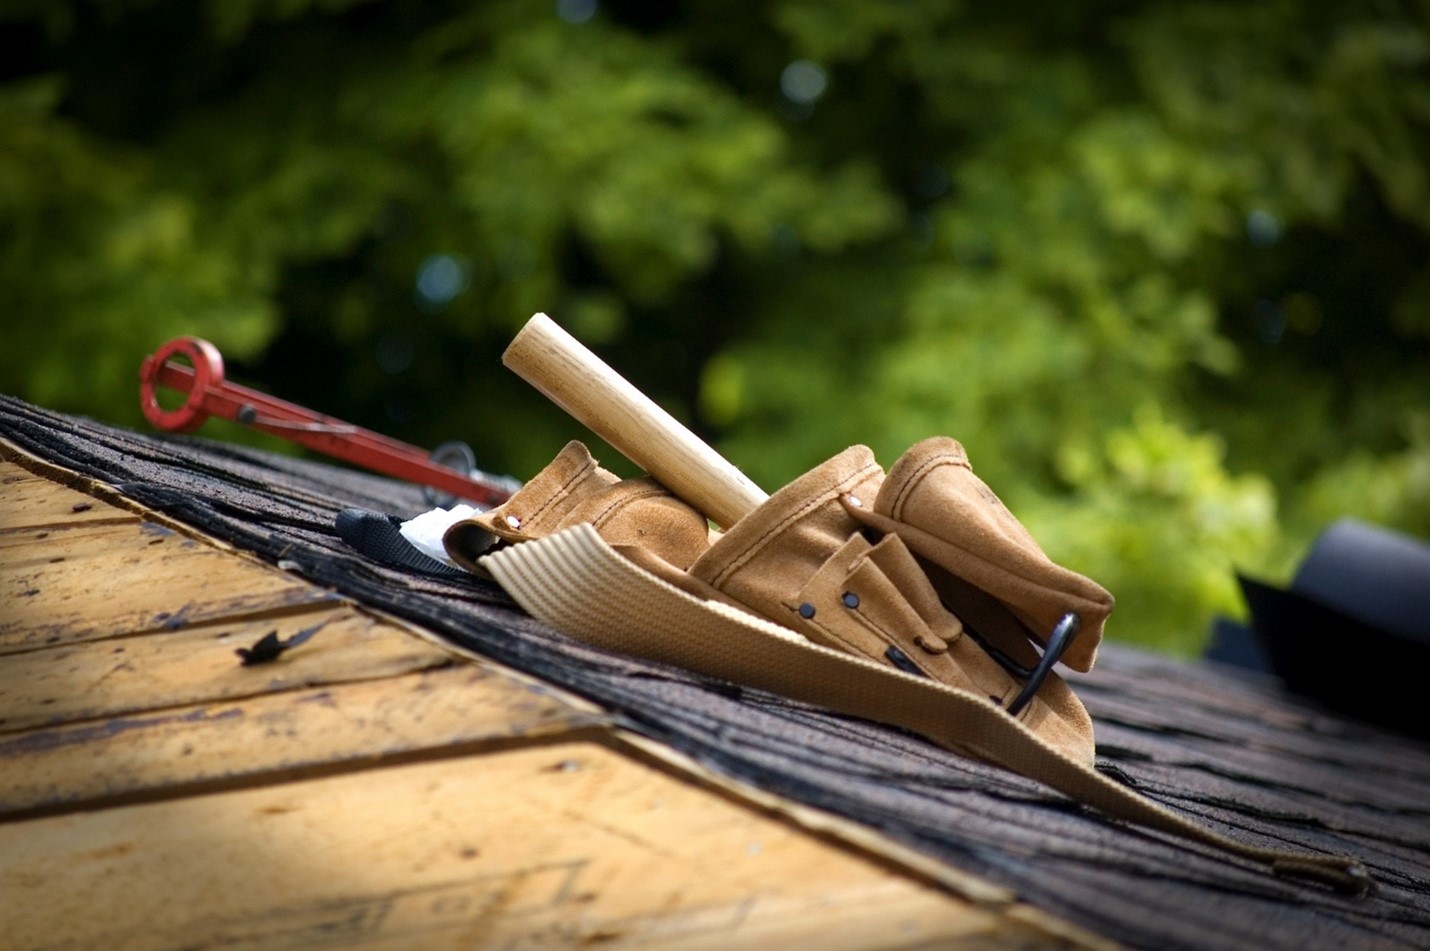 Fixing a roof as part of the ultimate summer building maintenance checklist